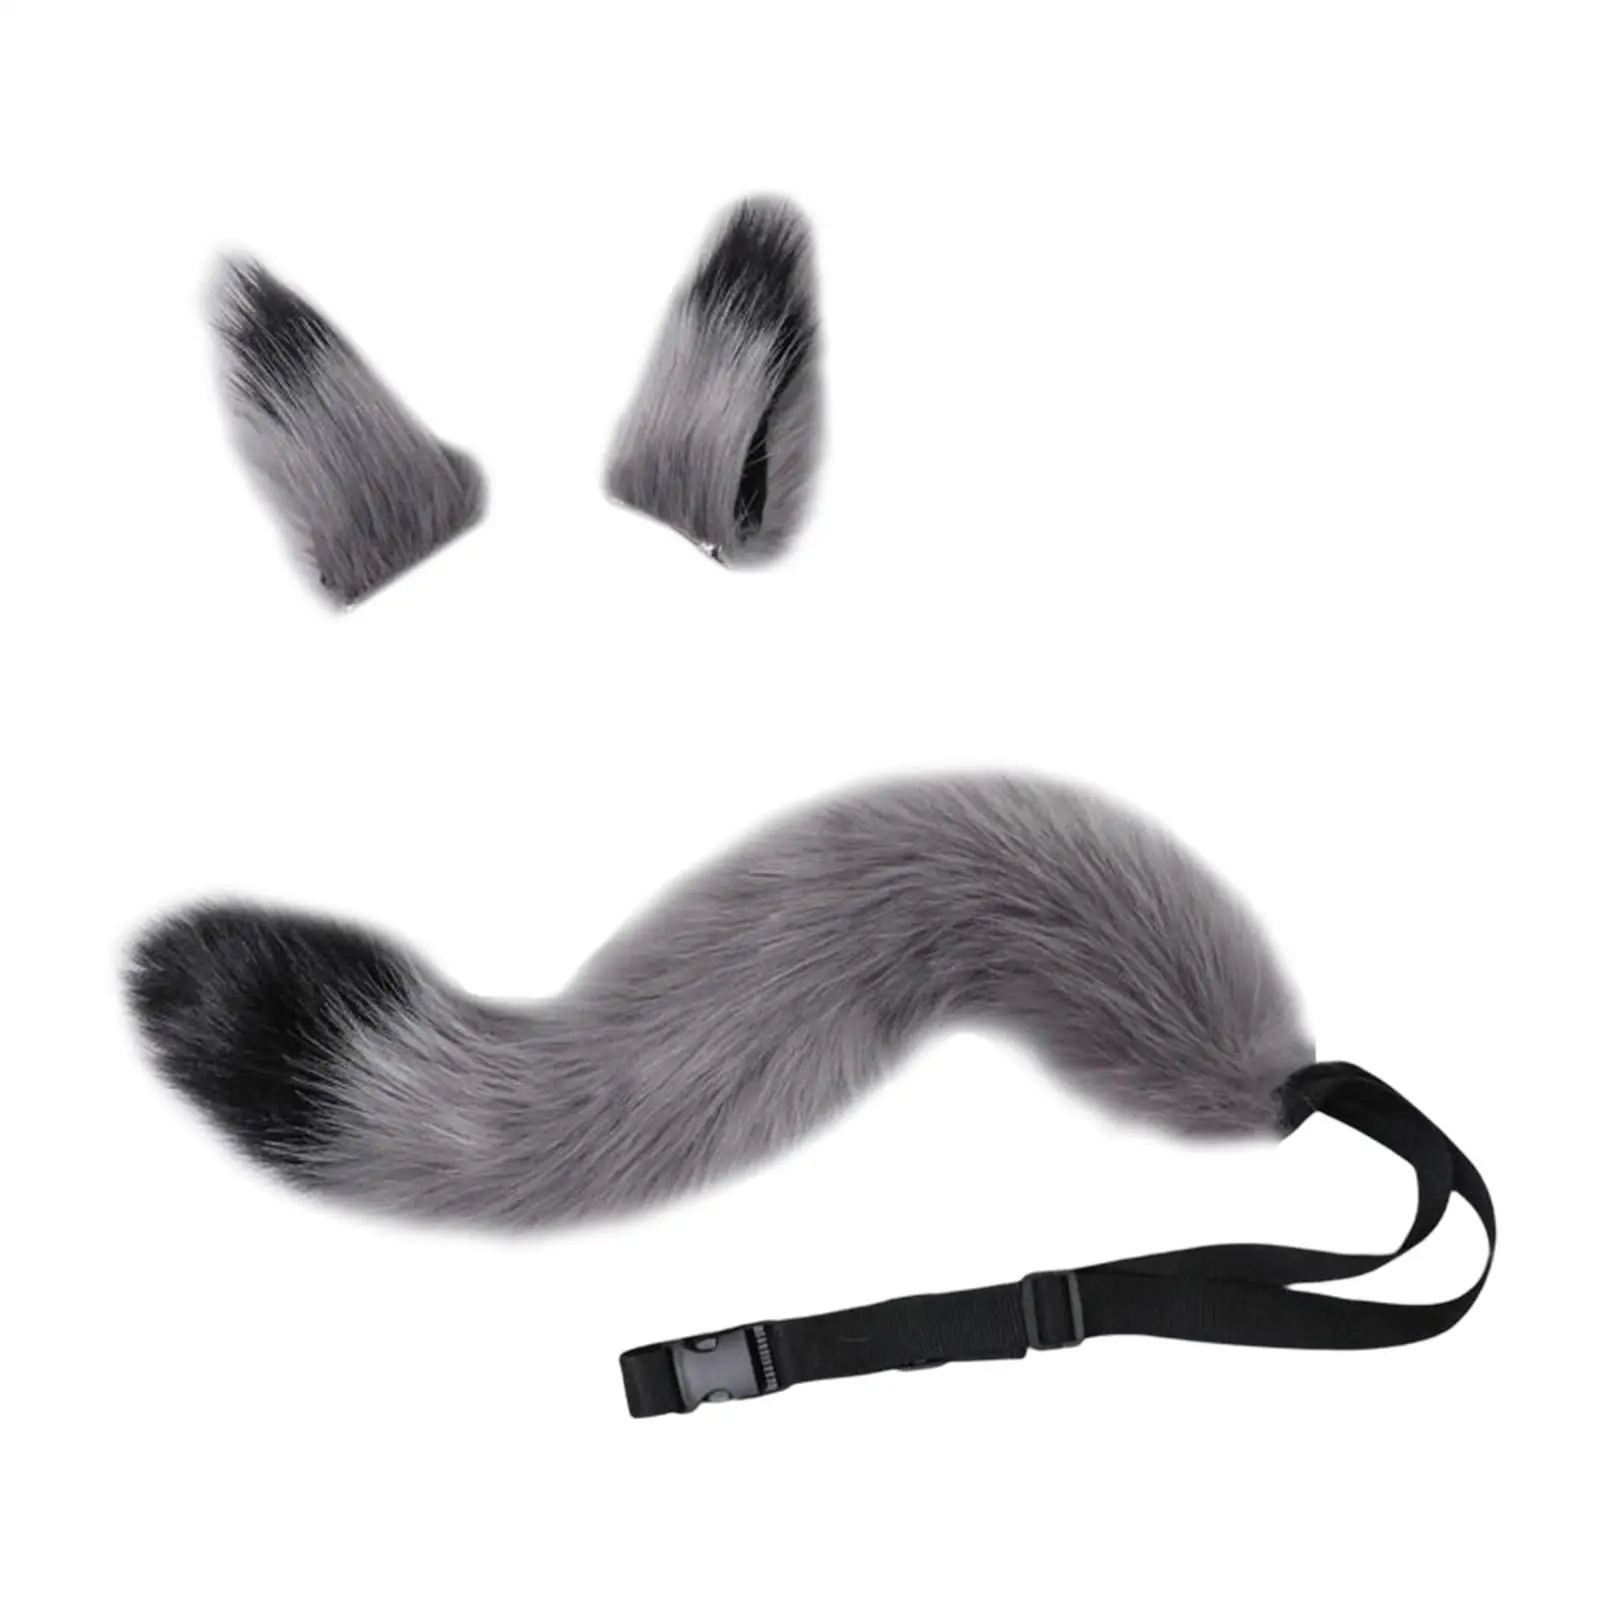  Wolf Ears Tail Cosplay Set Plush Animal Furry Gifts Hair Clip for Dress up Fancy Party Anime Adults Children.